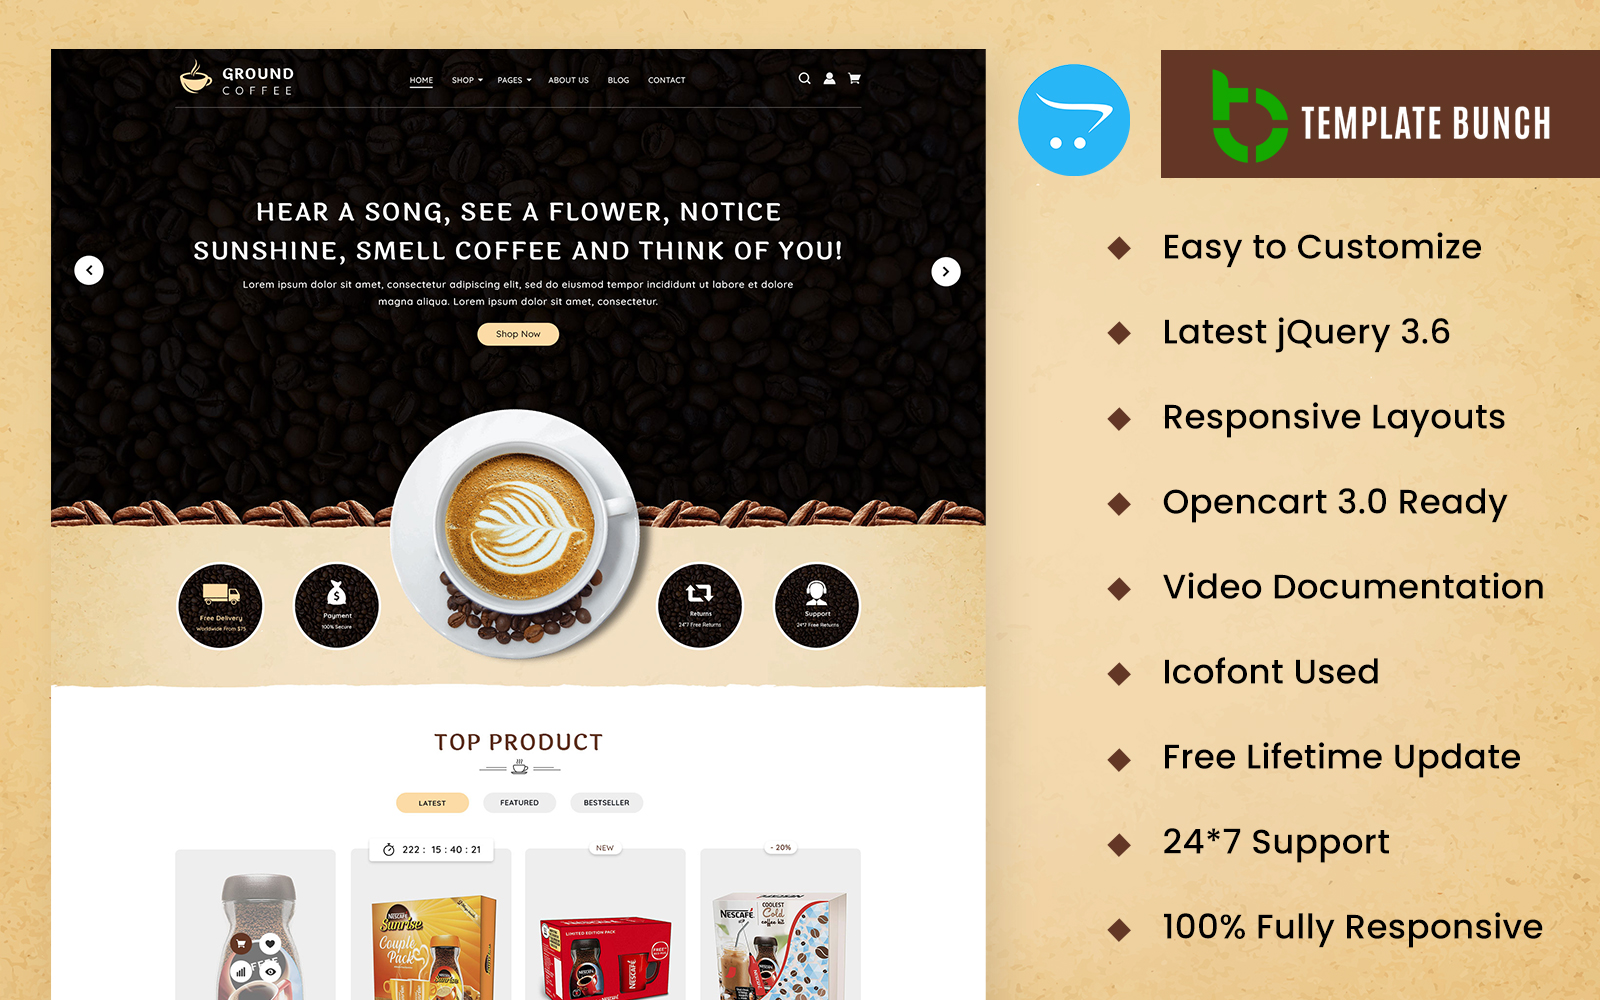 Ground Coffee - Responsive OpenCart Theme for eCommerce